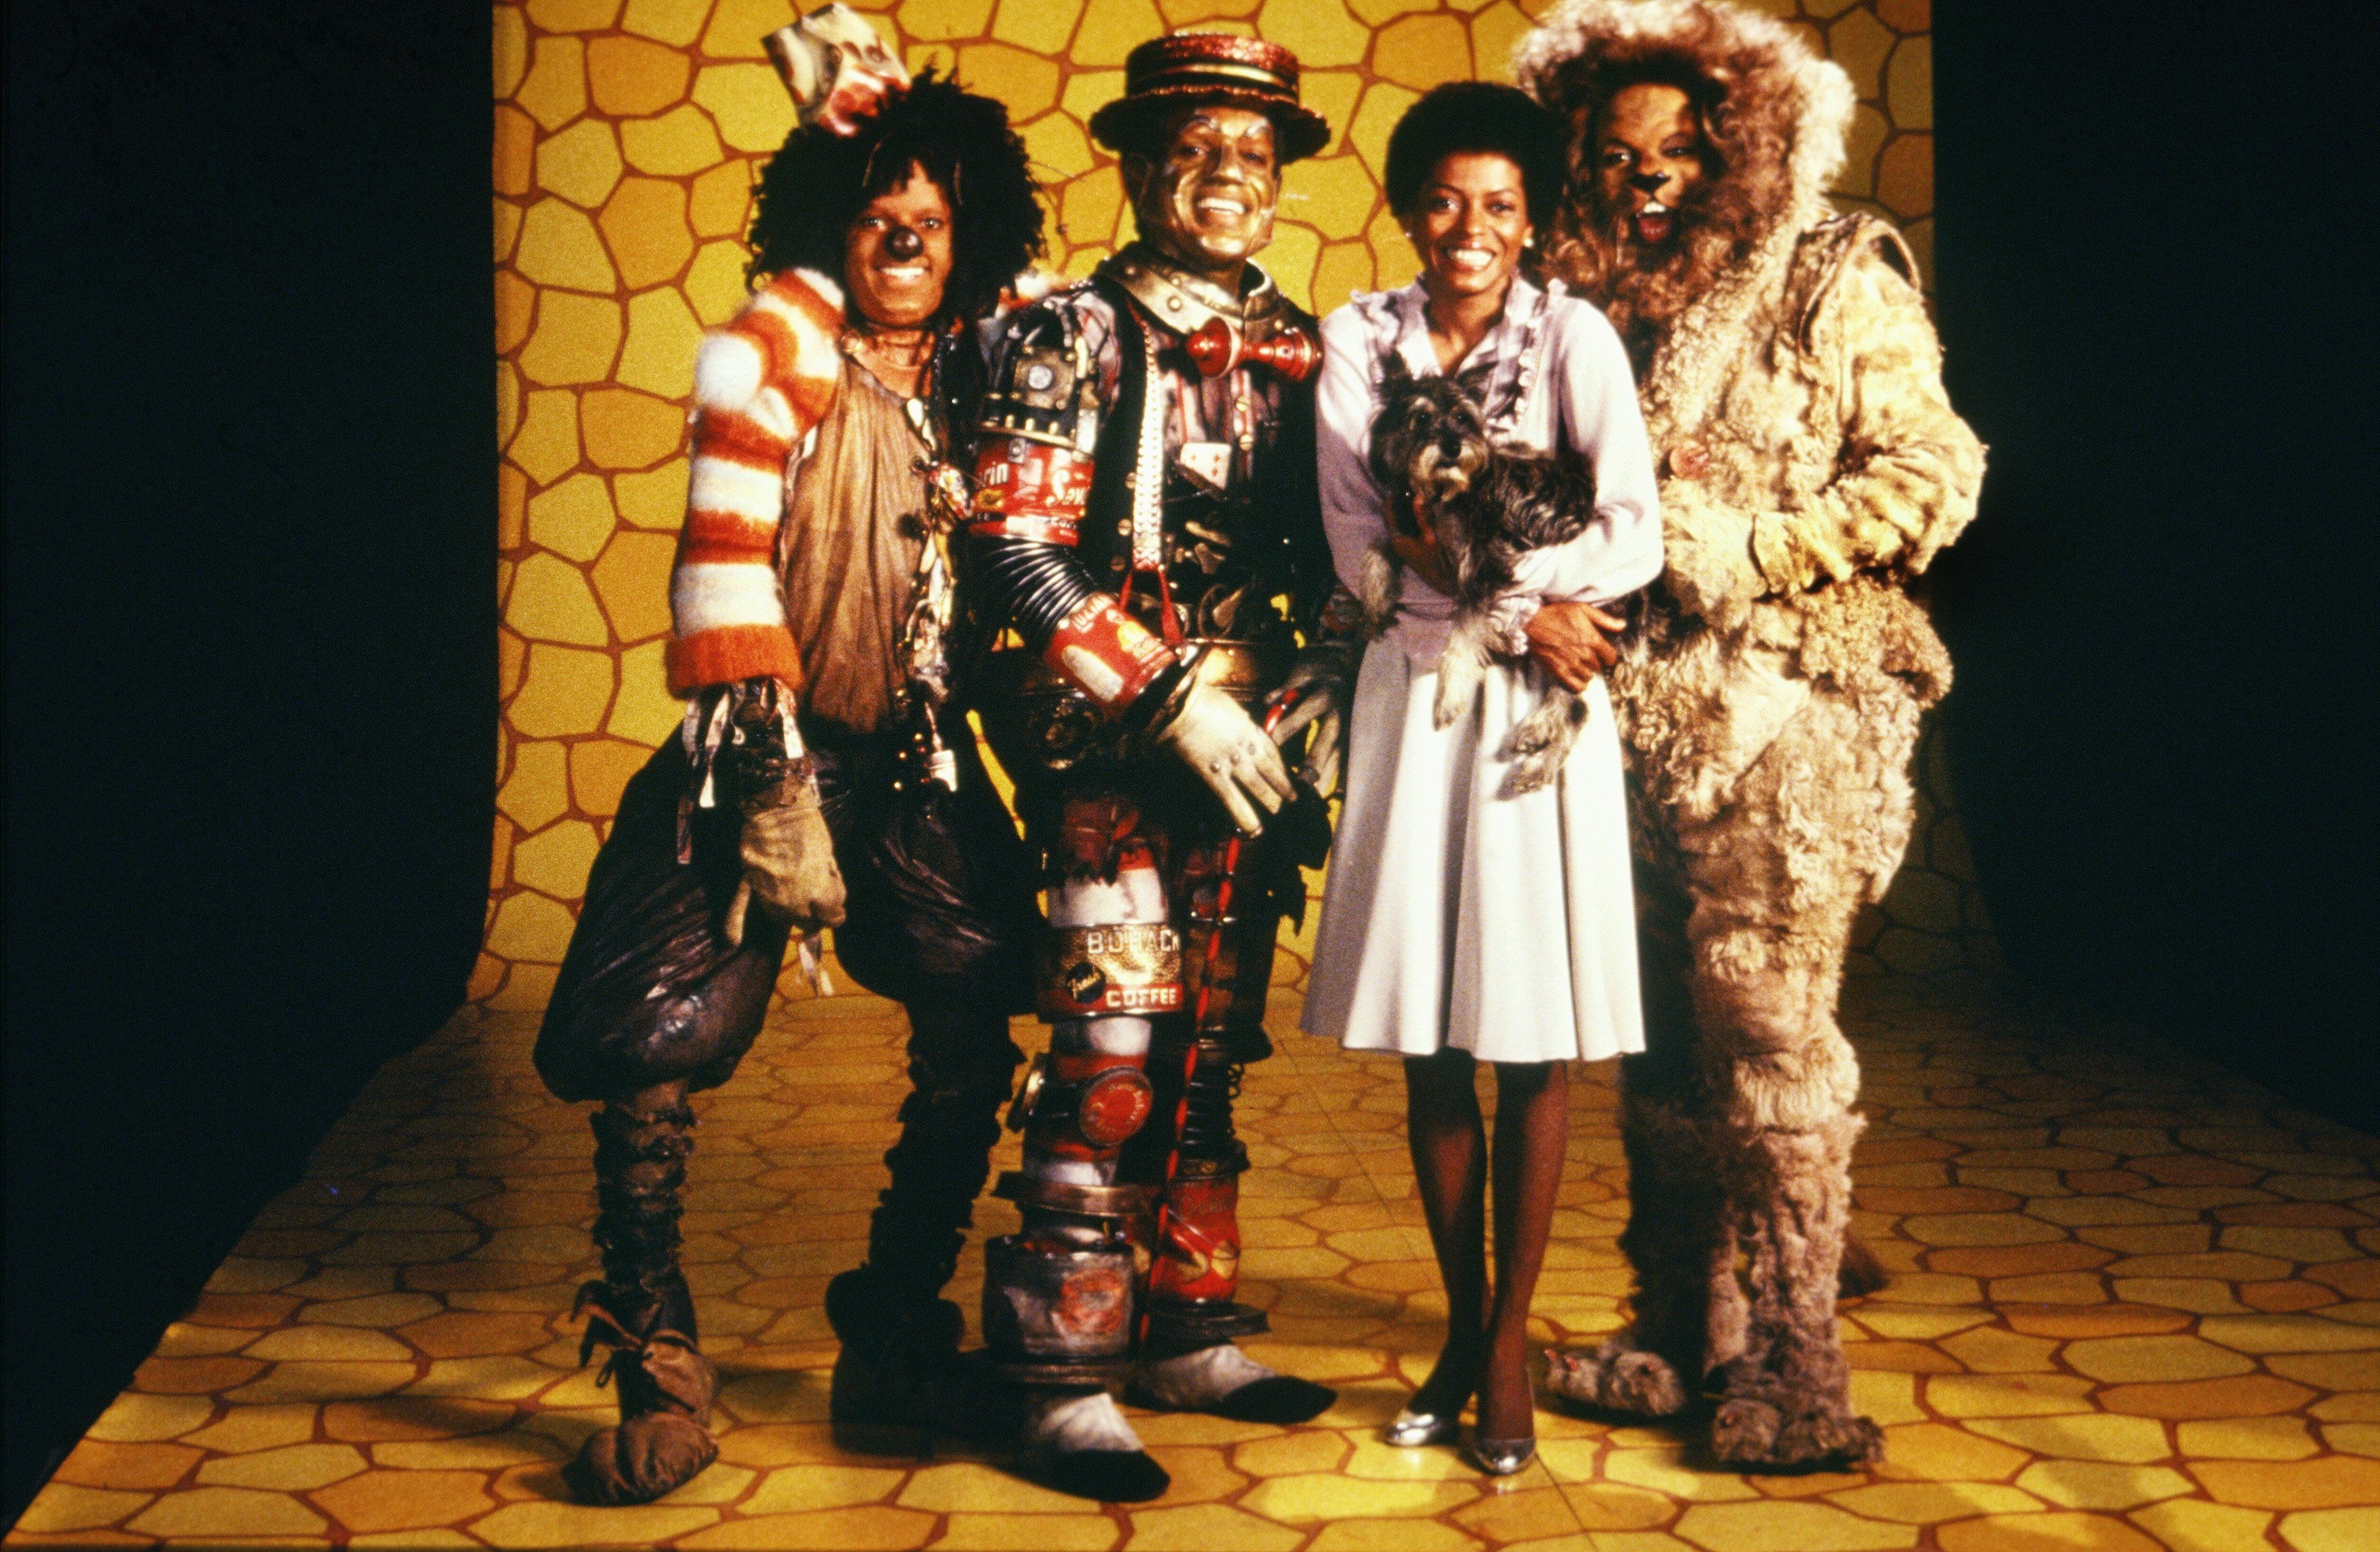 Celebrating Classic Musical Film The Wiz on Its 40th Anniversary